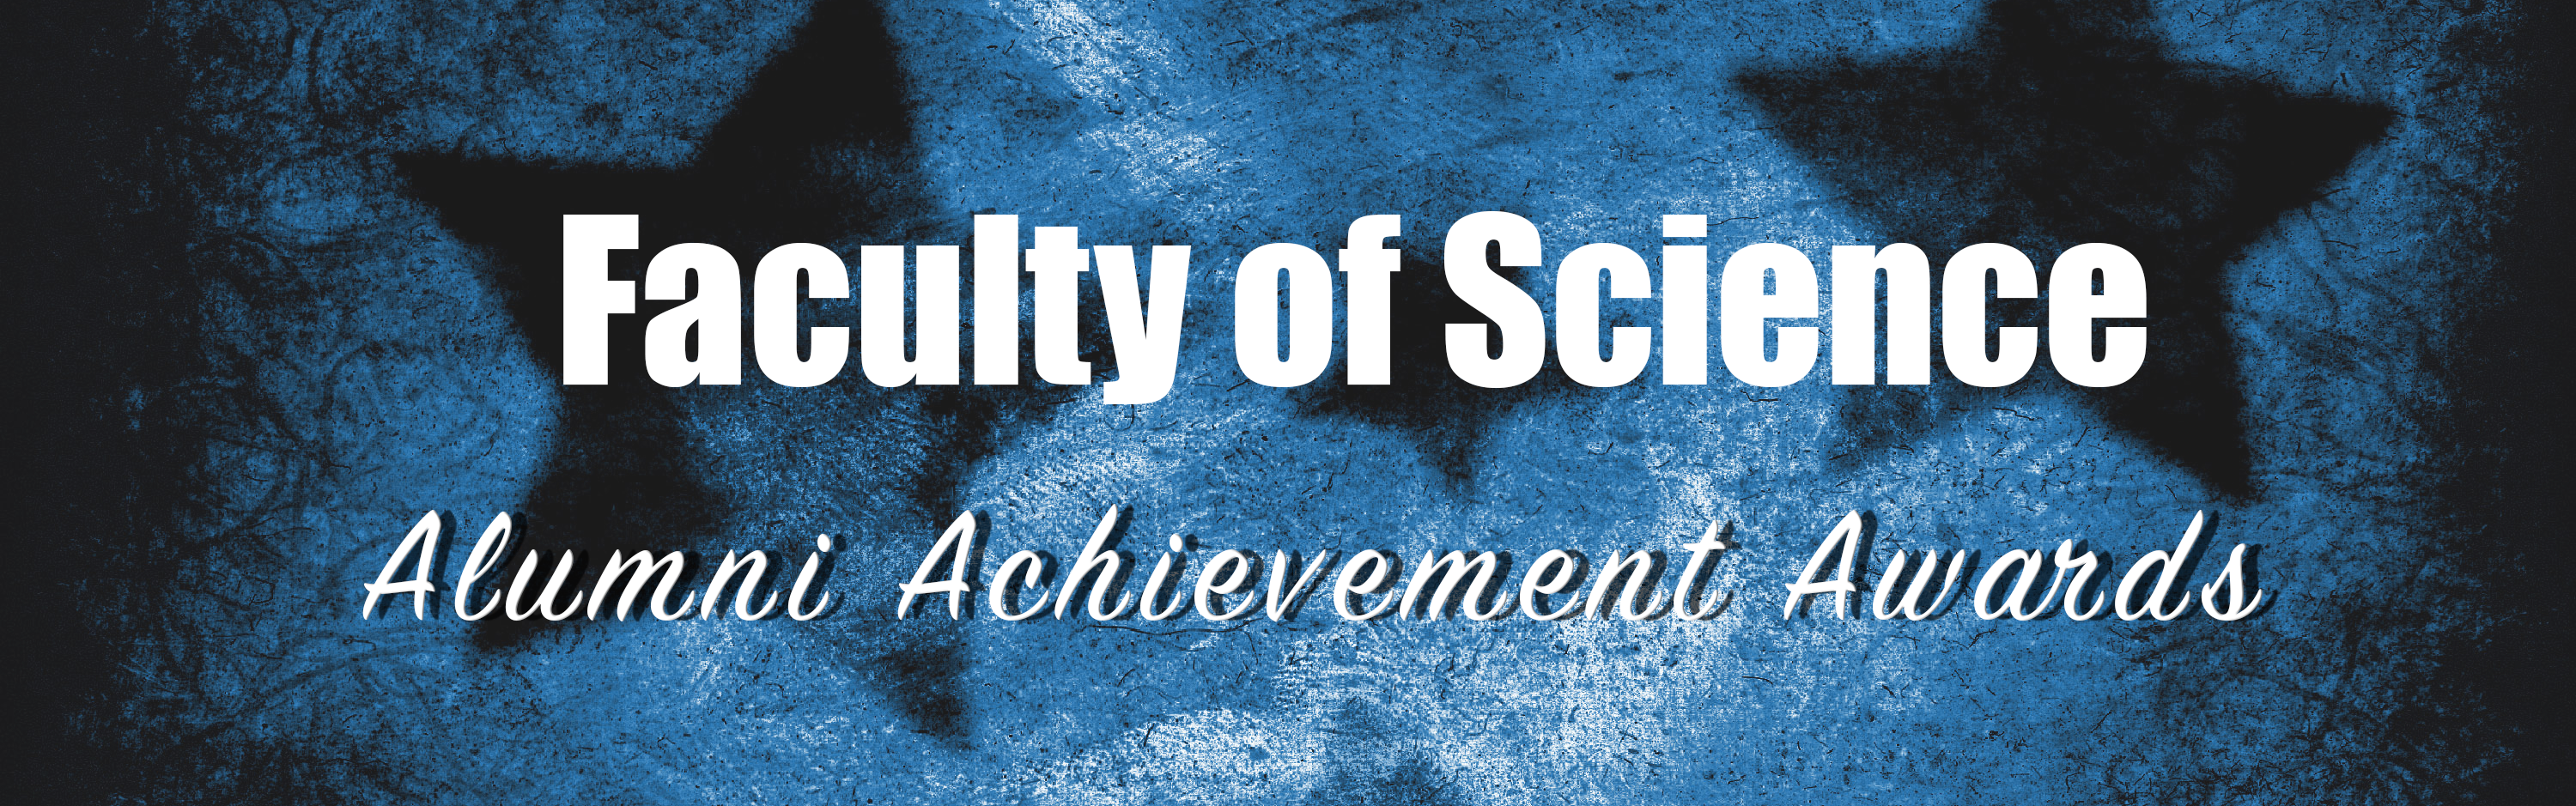 Faculty of Science Alumni Achievement Awards